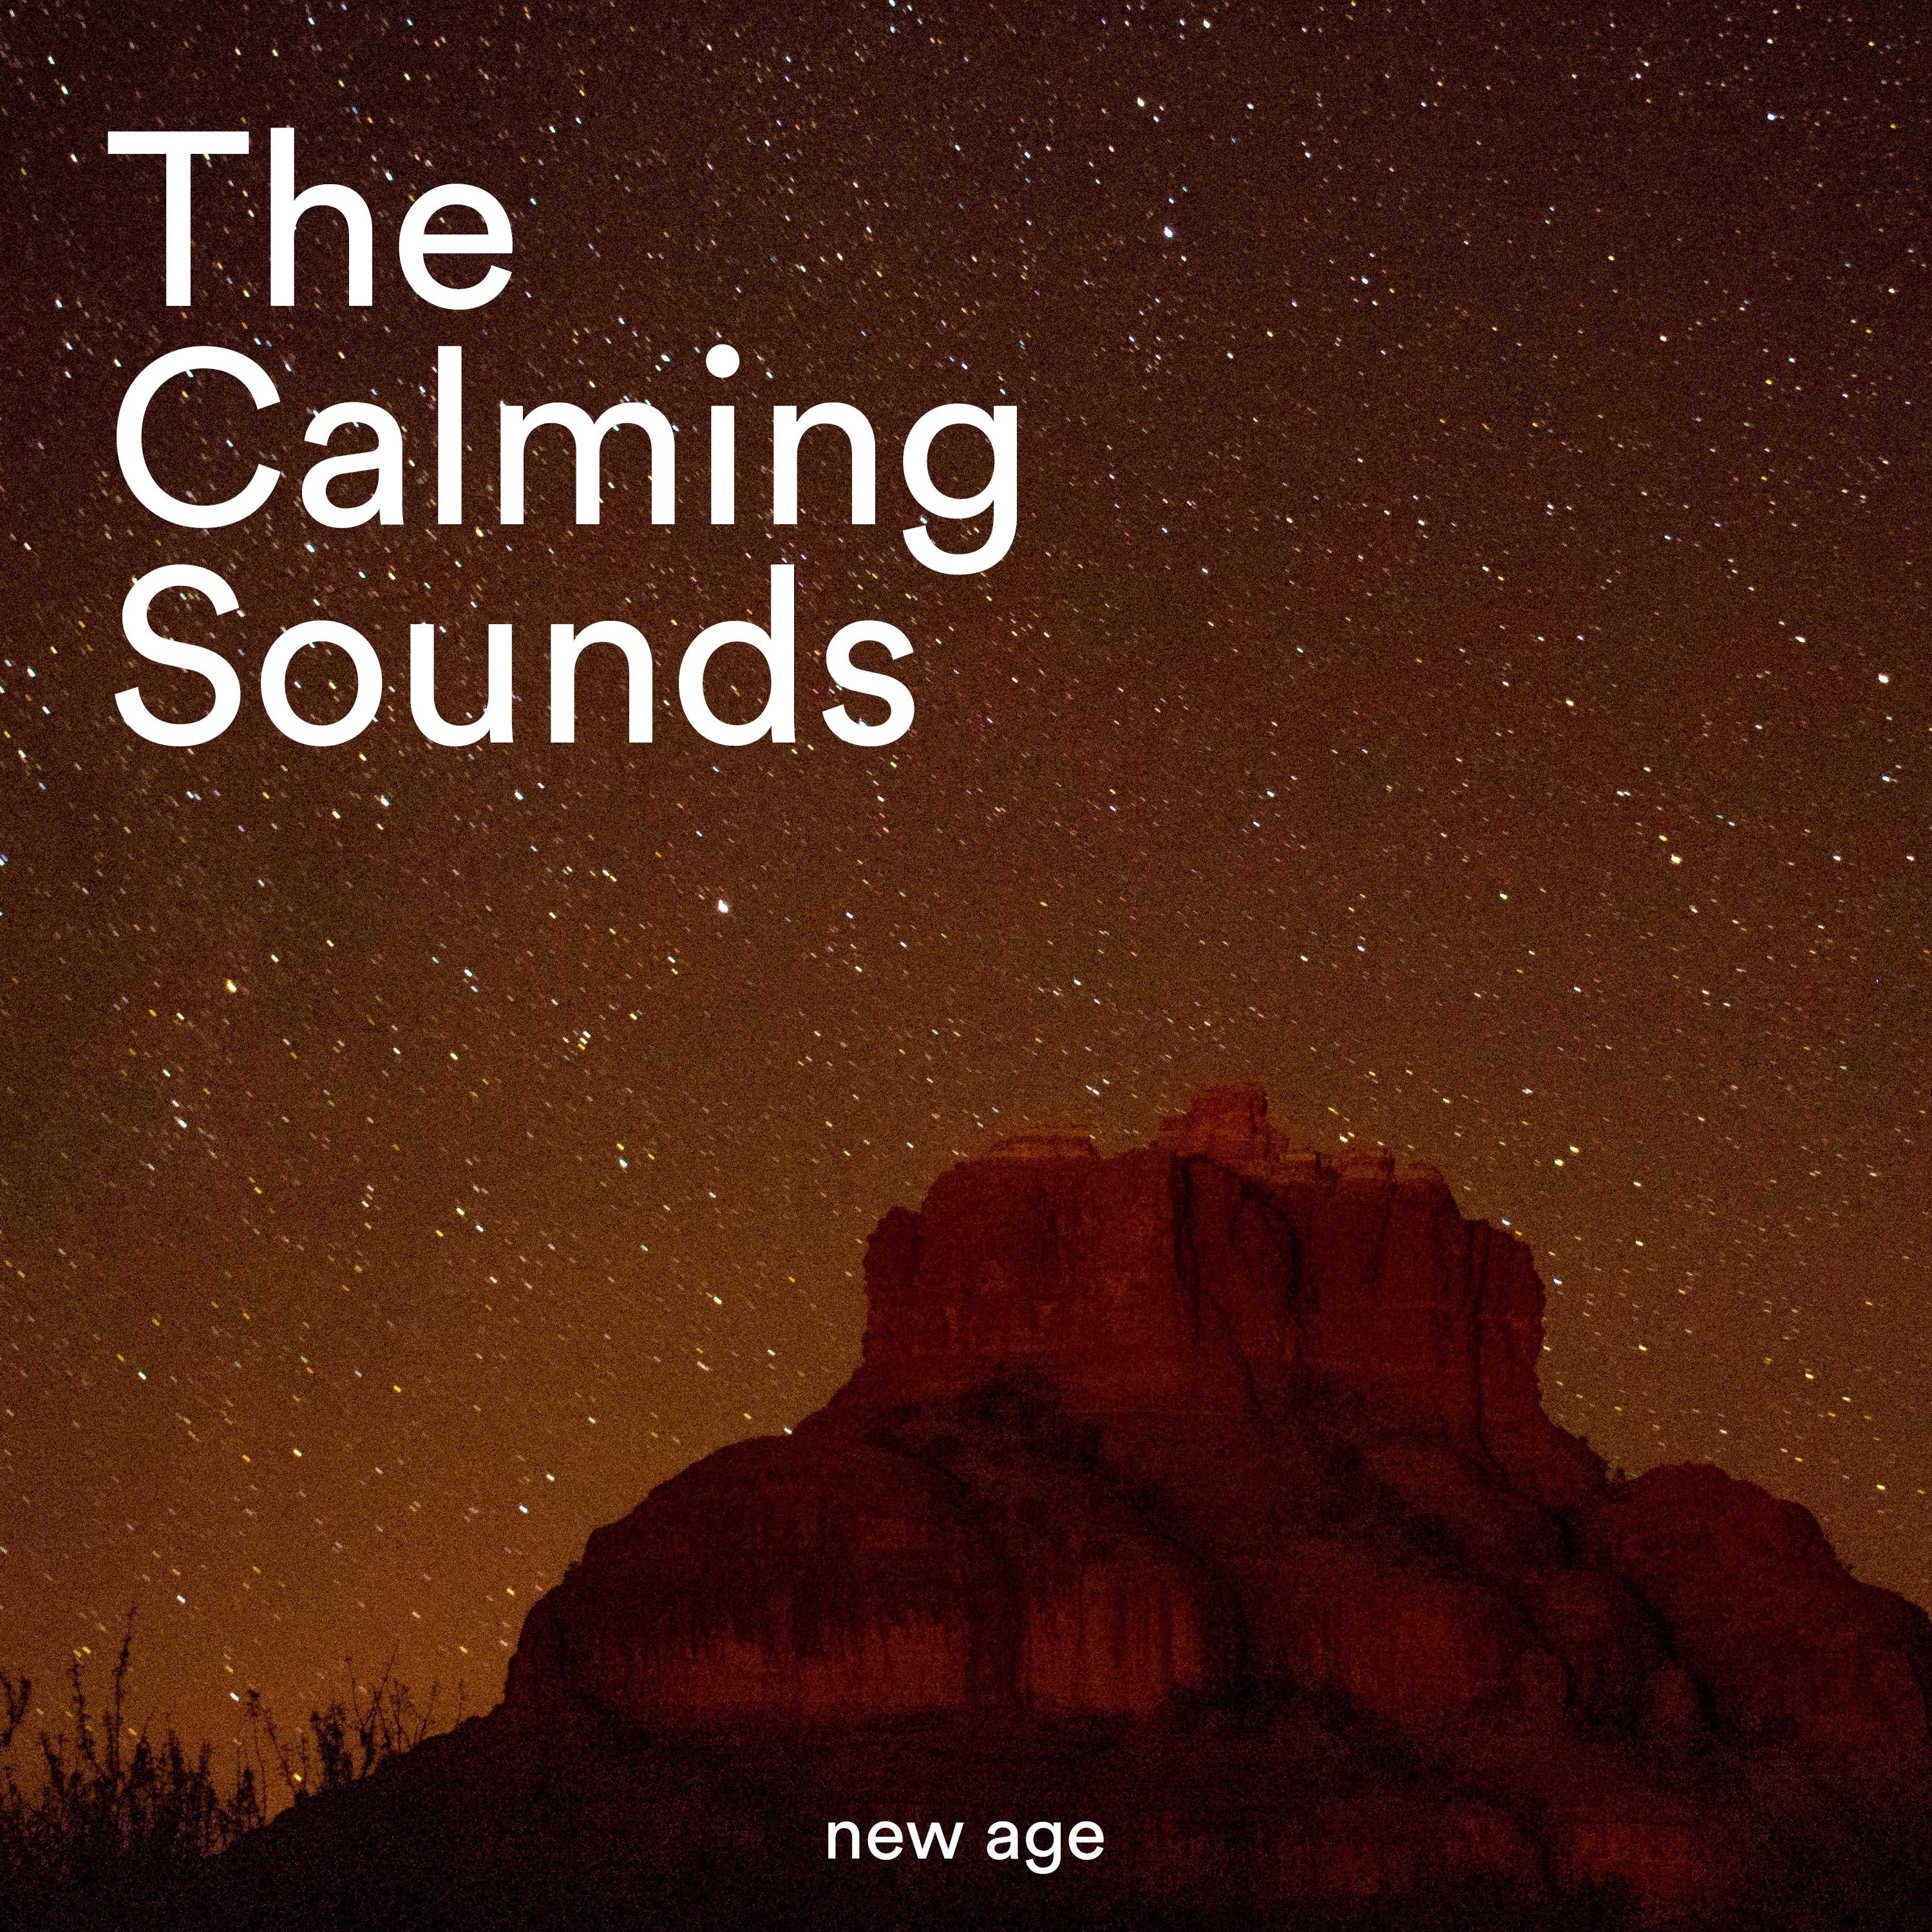 The Calming Sounds - Instrumental Music with Nature Sounds